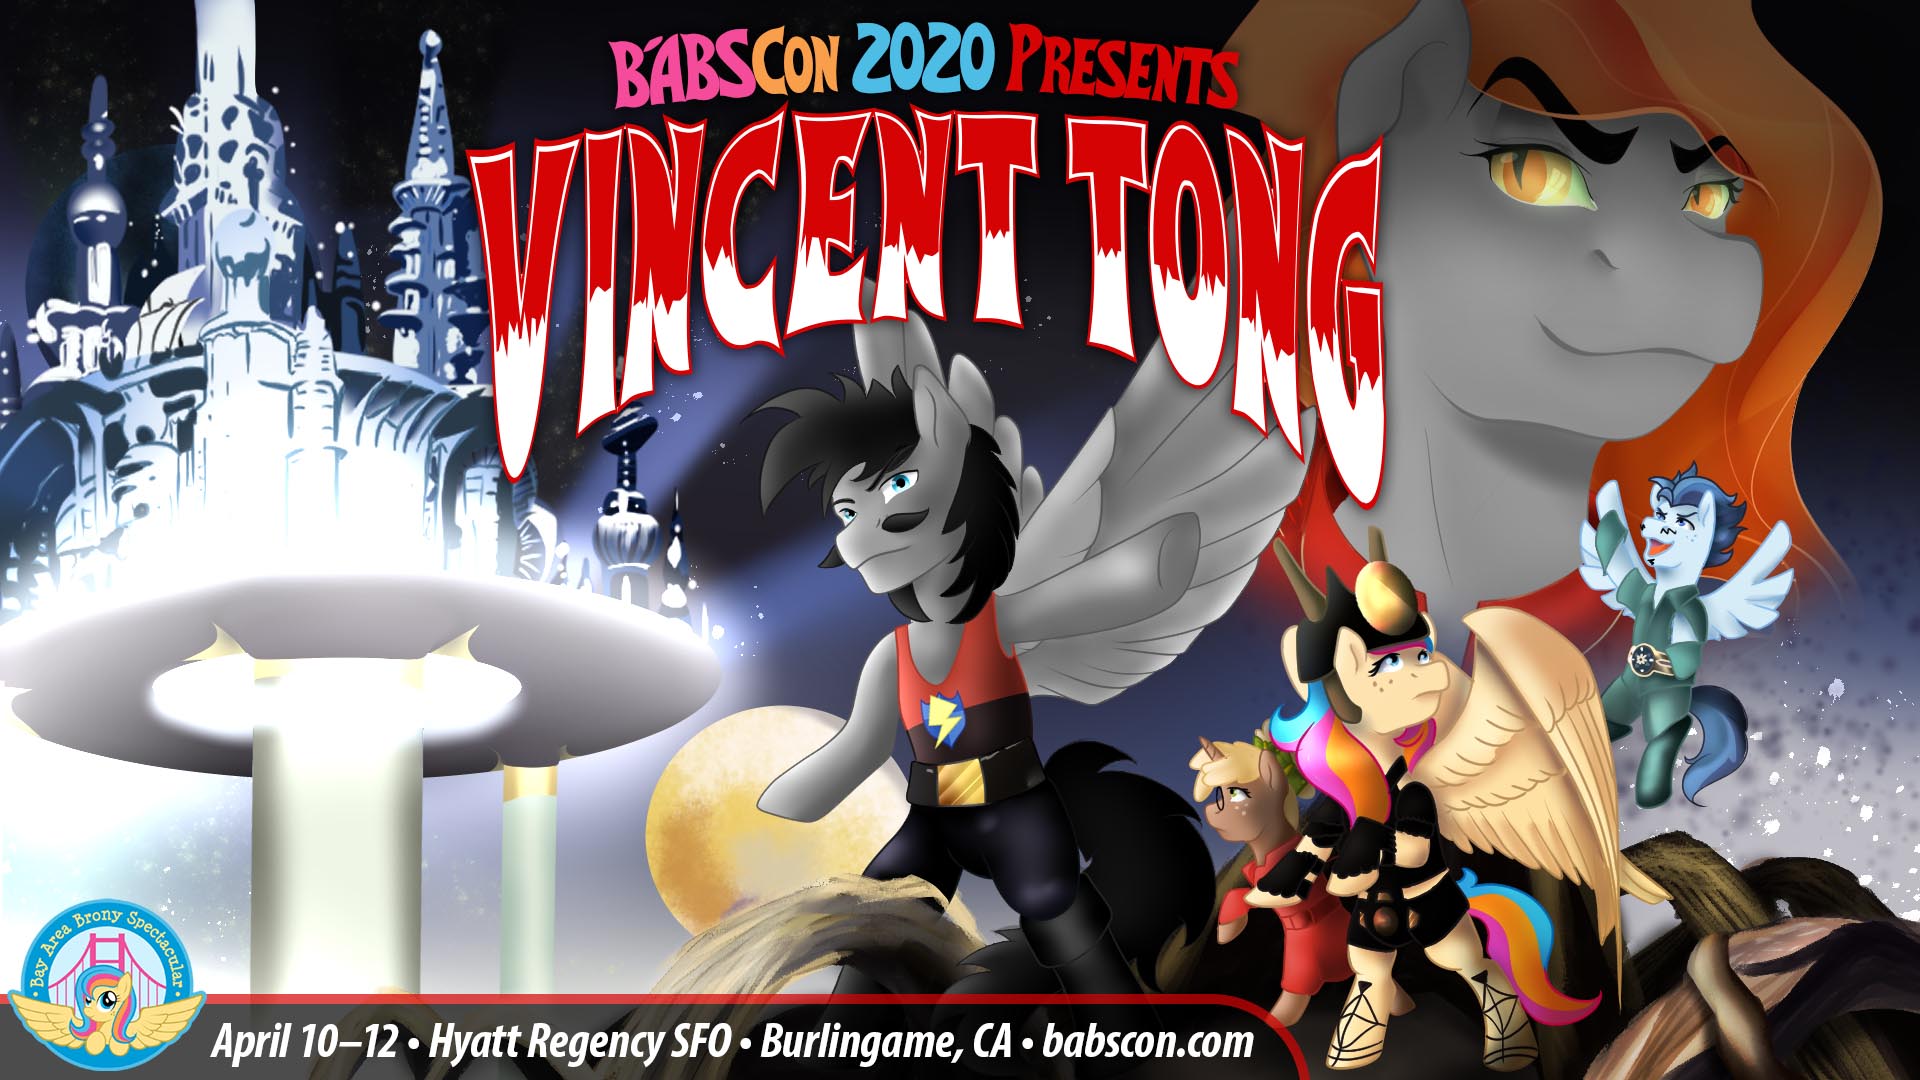 Vincent Tong Joins BABSCon 2020 in a Flash